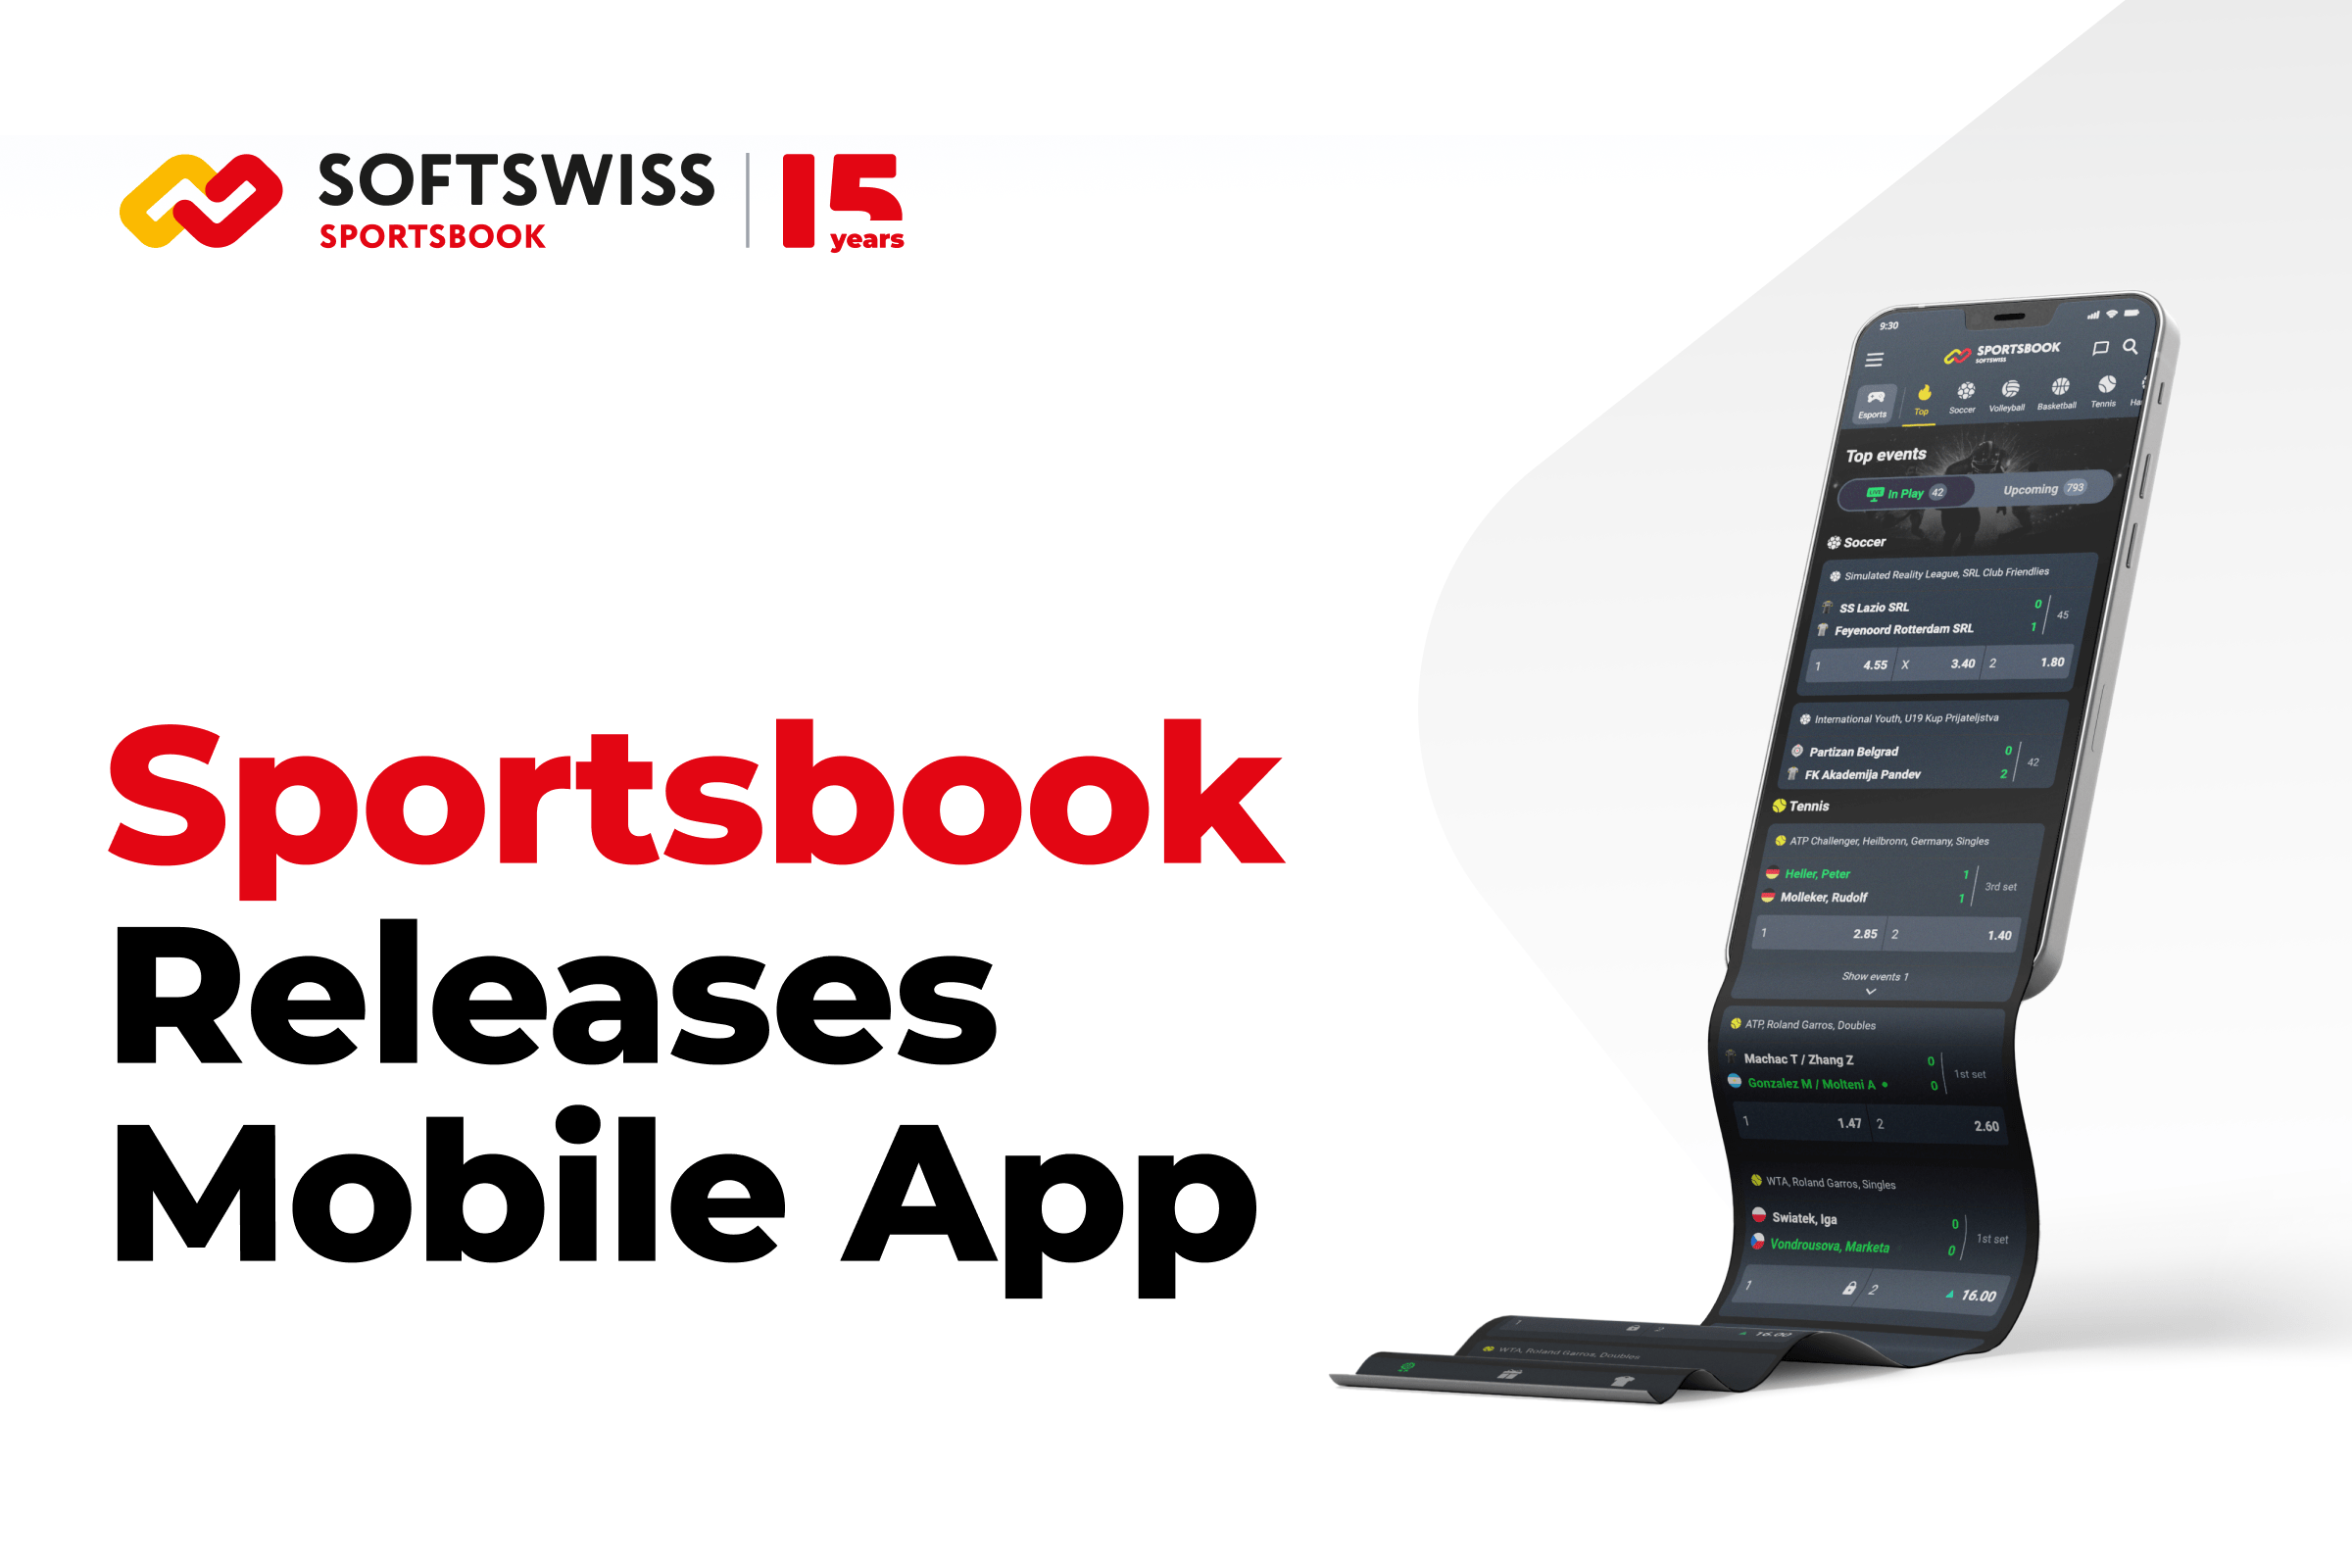 SOFTSWISS Sportsbook Releases Mobile App on Google Play and App Store